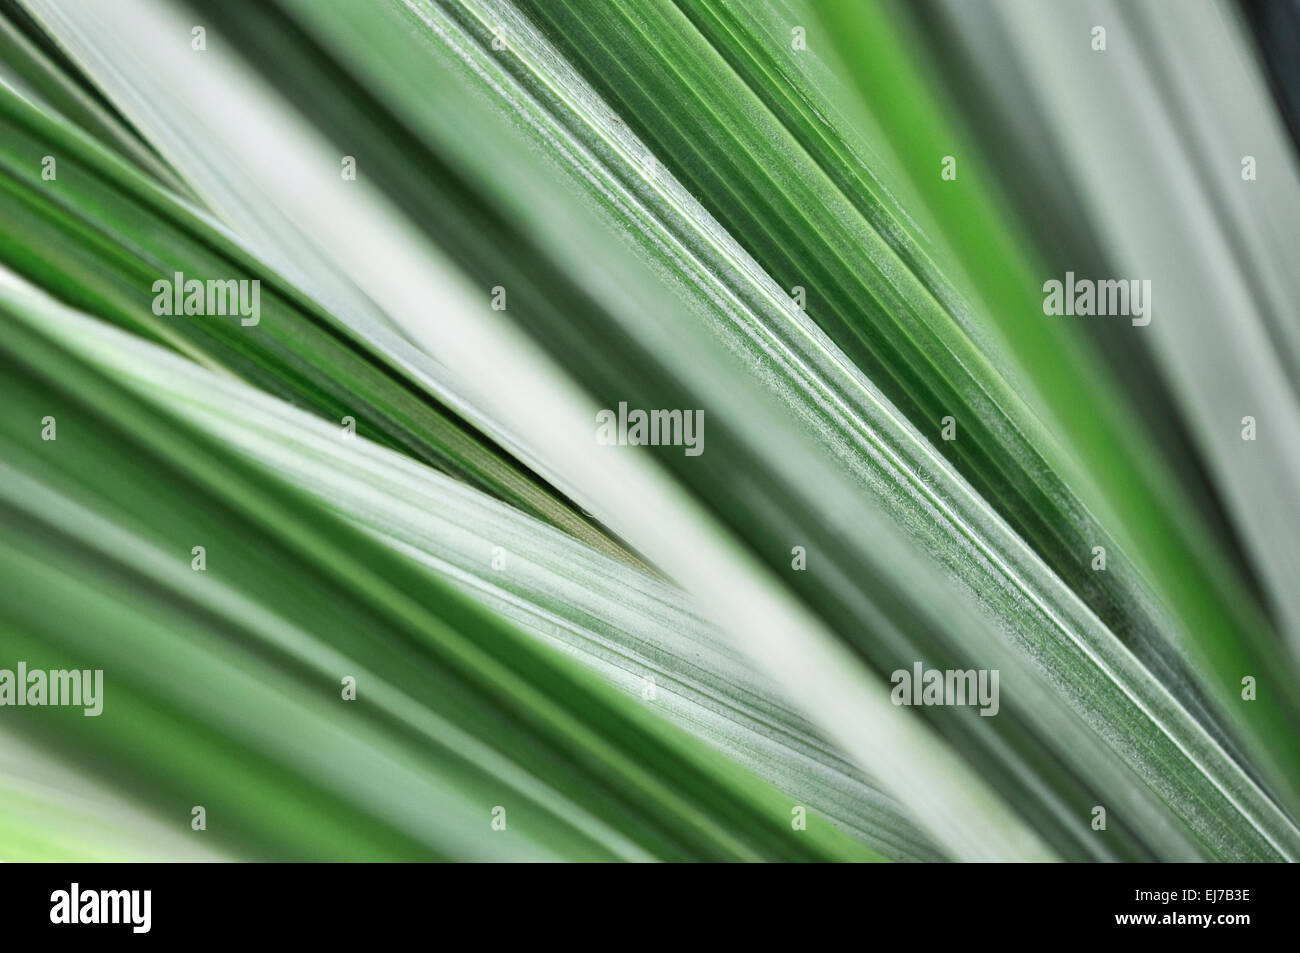 Abstract image of the leaves of an Astelia plant with diagonal lines of green and silver. Stock Photo